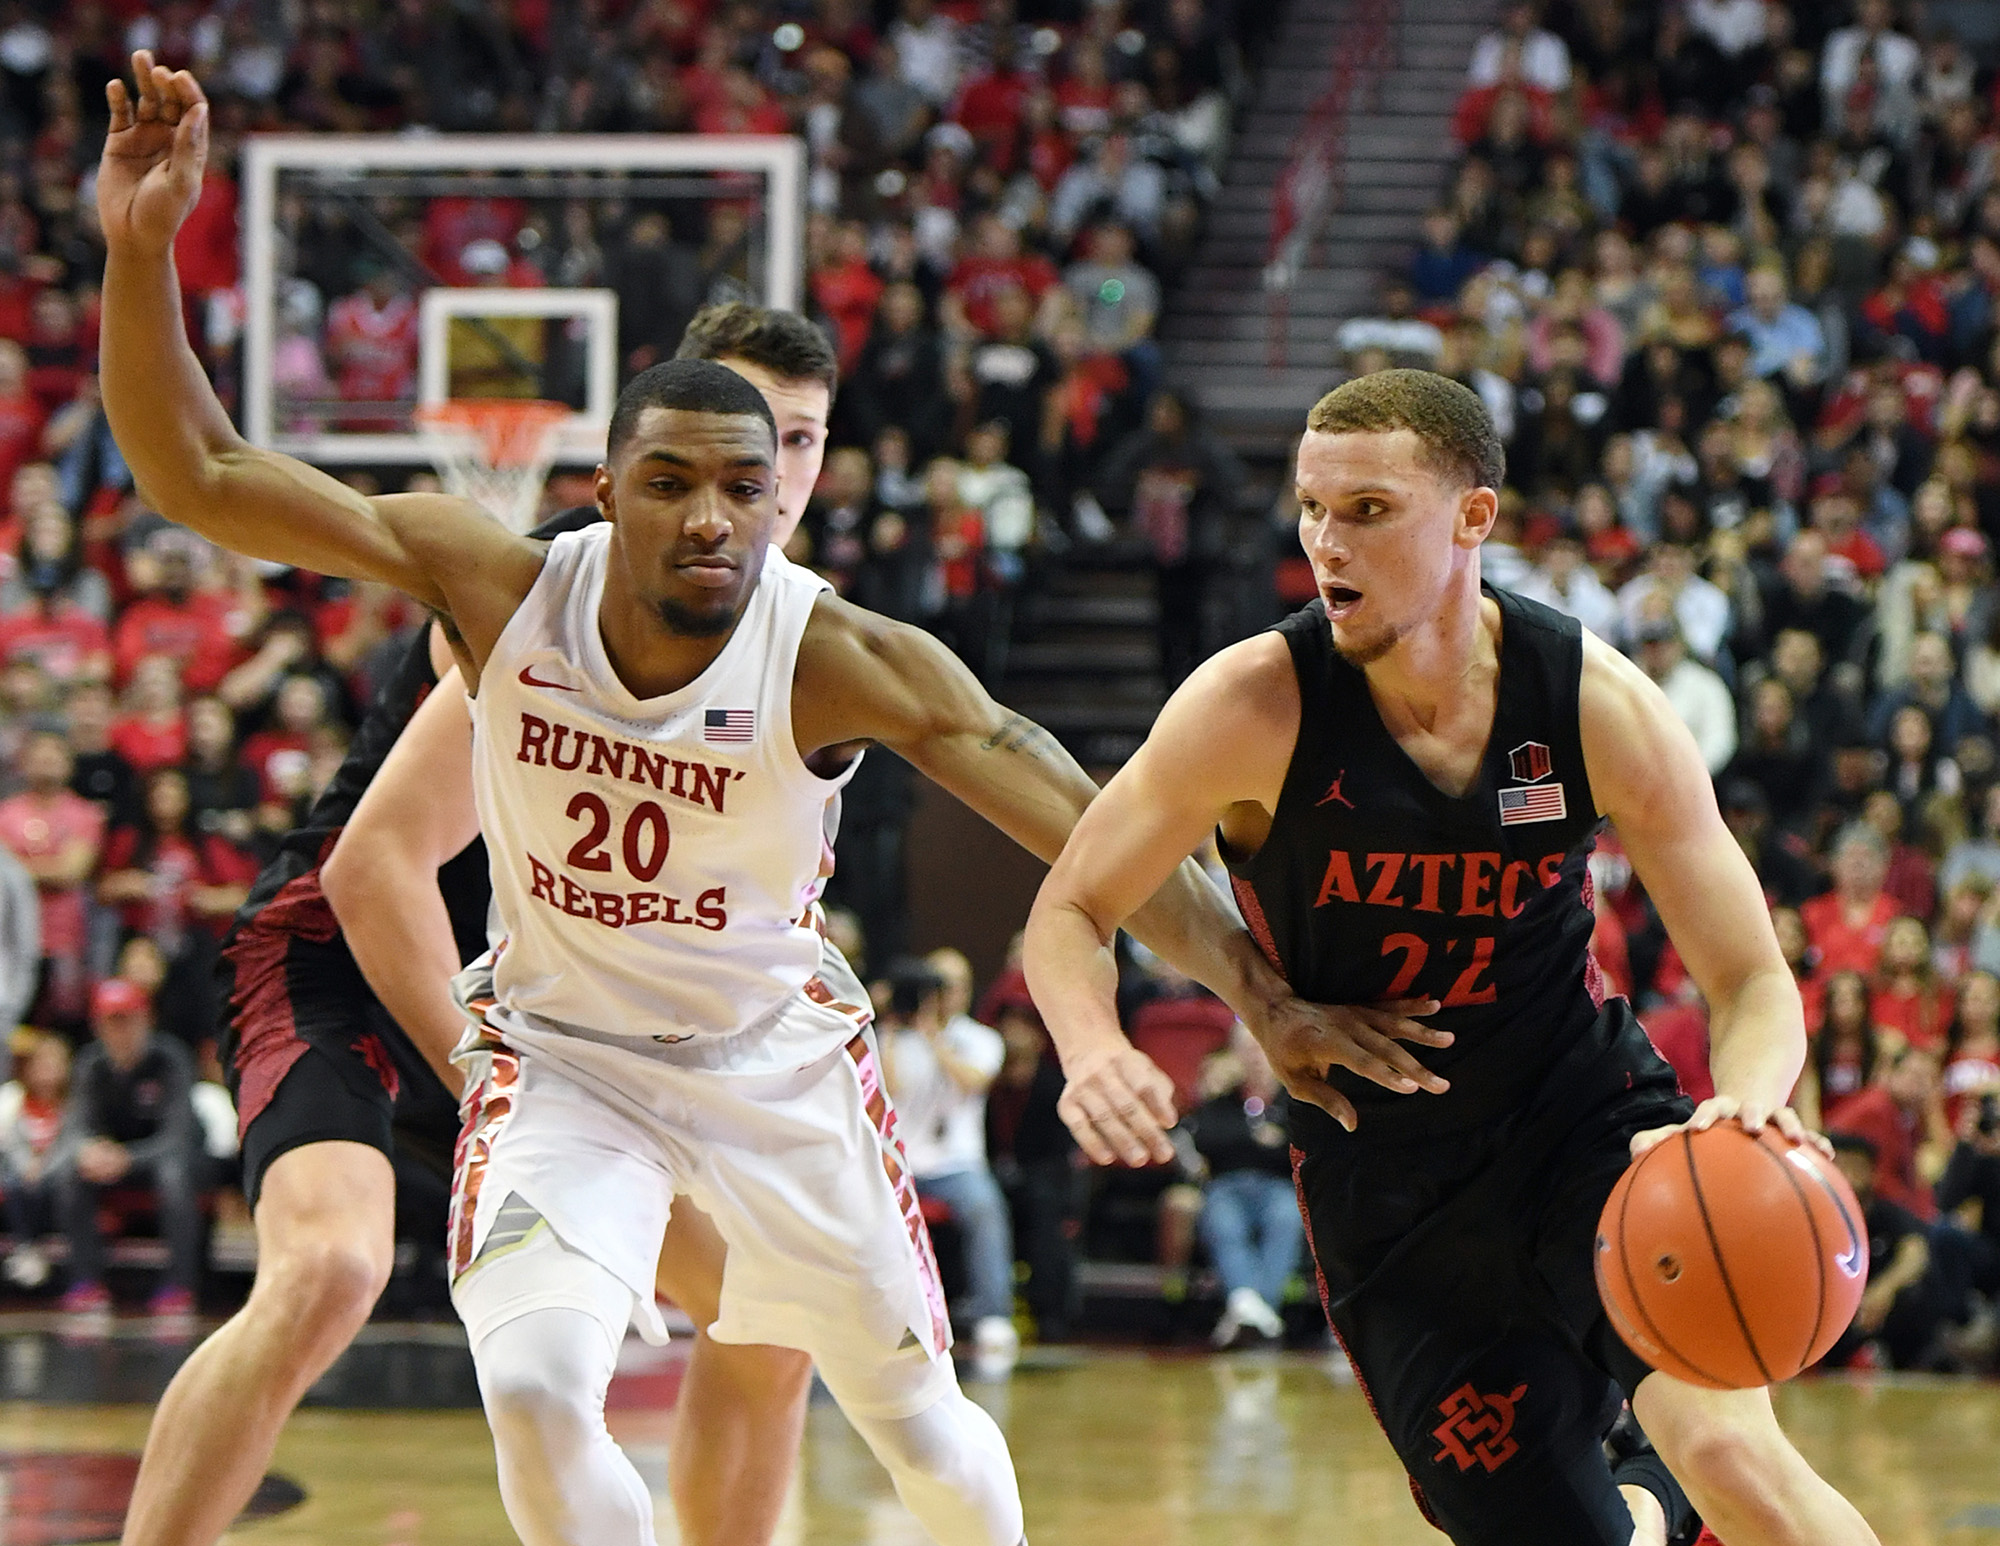 Malachi Flynn (22) of the San Diego State Aztecs drives against Nick Blair (20) of the UNLV Rebels on Sunday, Jan. 26, 2020 at the Thomas & Mack Center in Las Vegas, Nev. The Aztecs defeated the Rebels 71-67. (Ethan Miller/Getty Images/TNS)